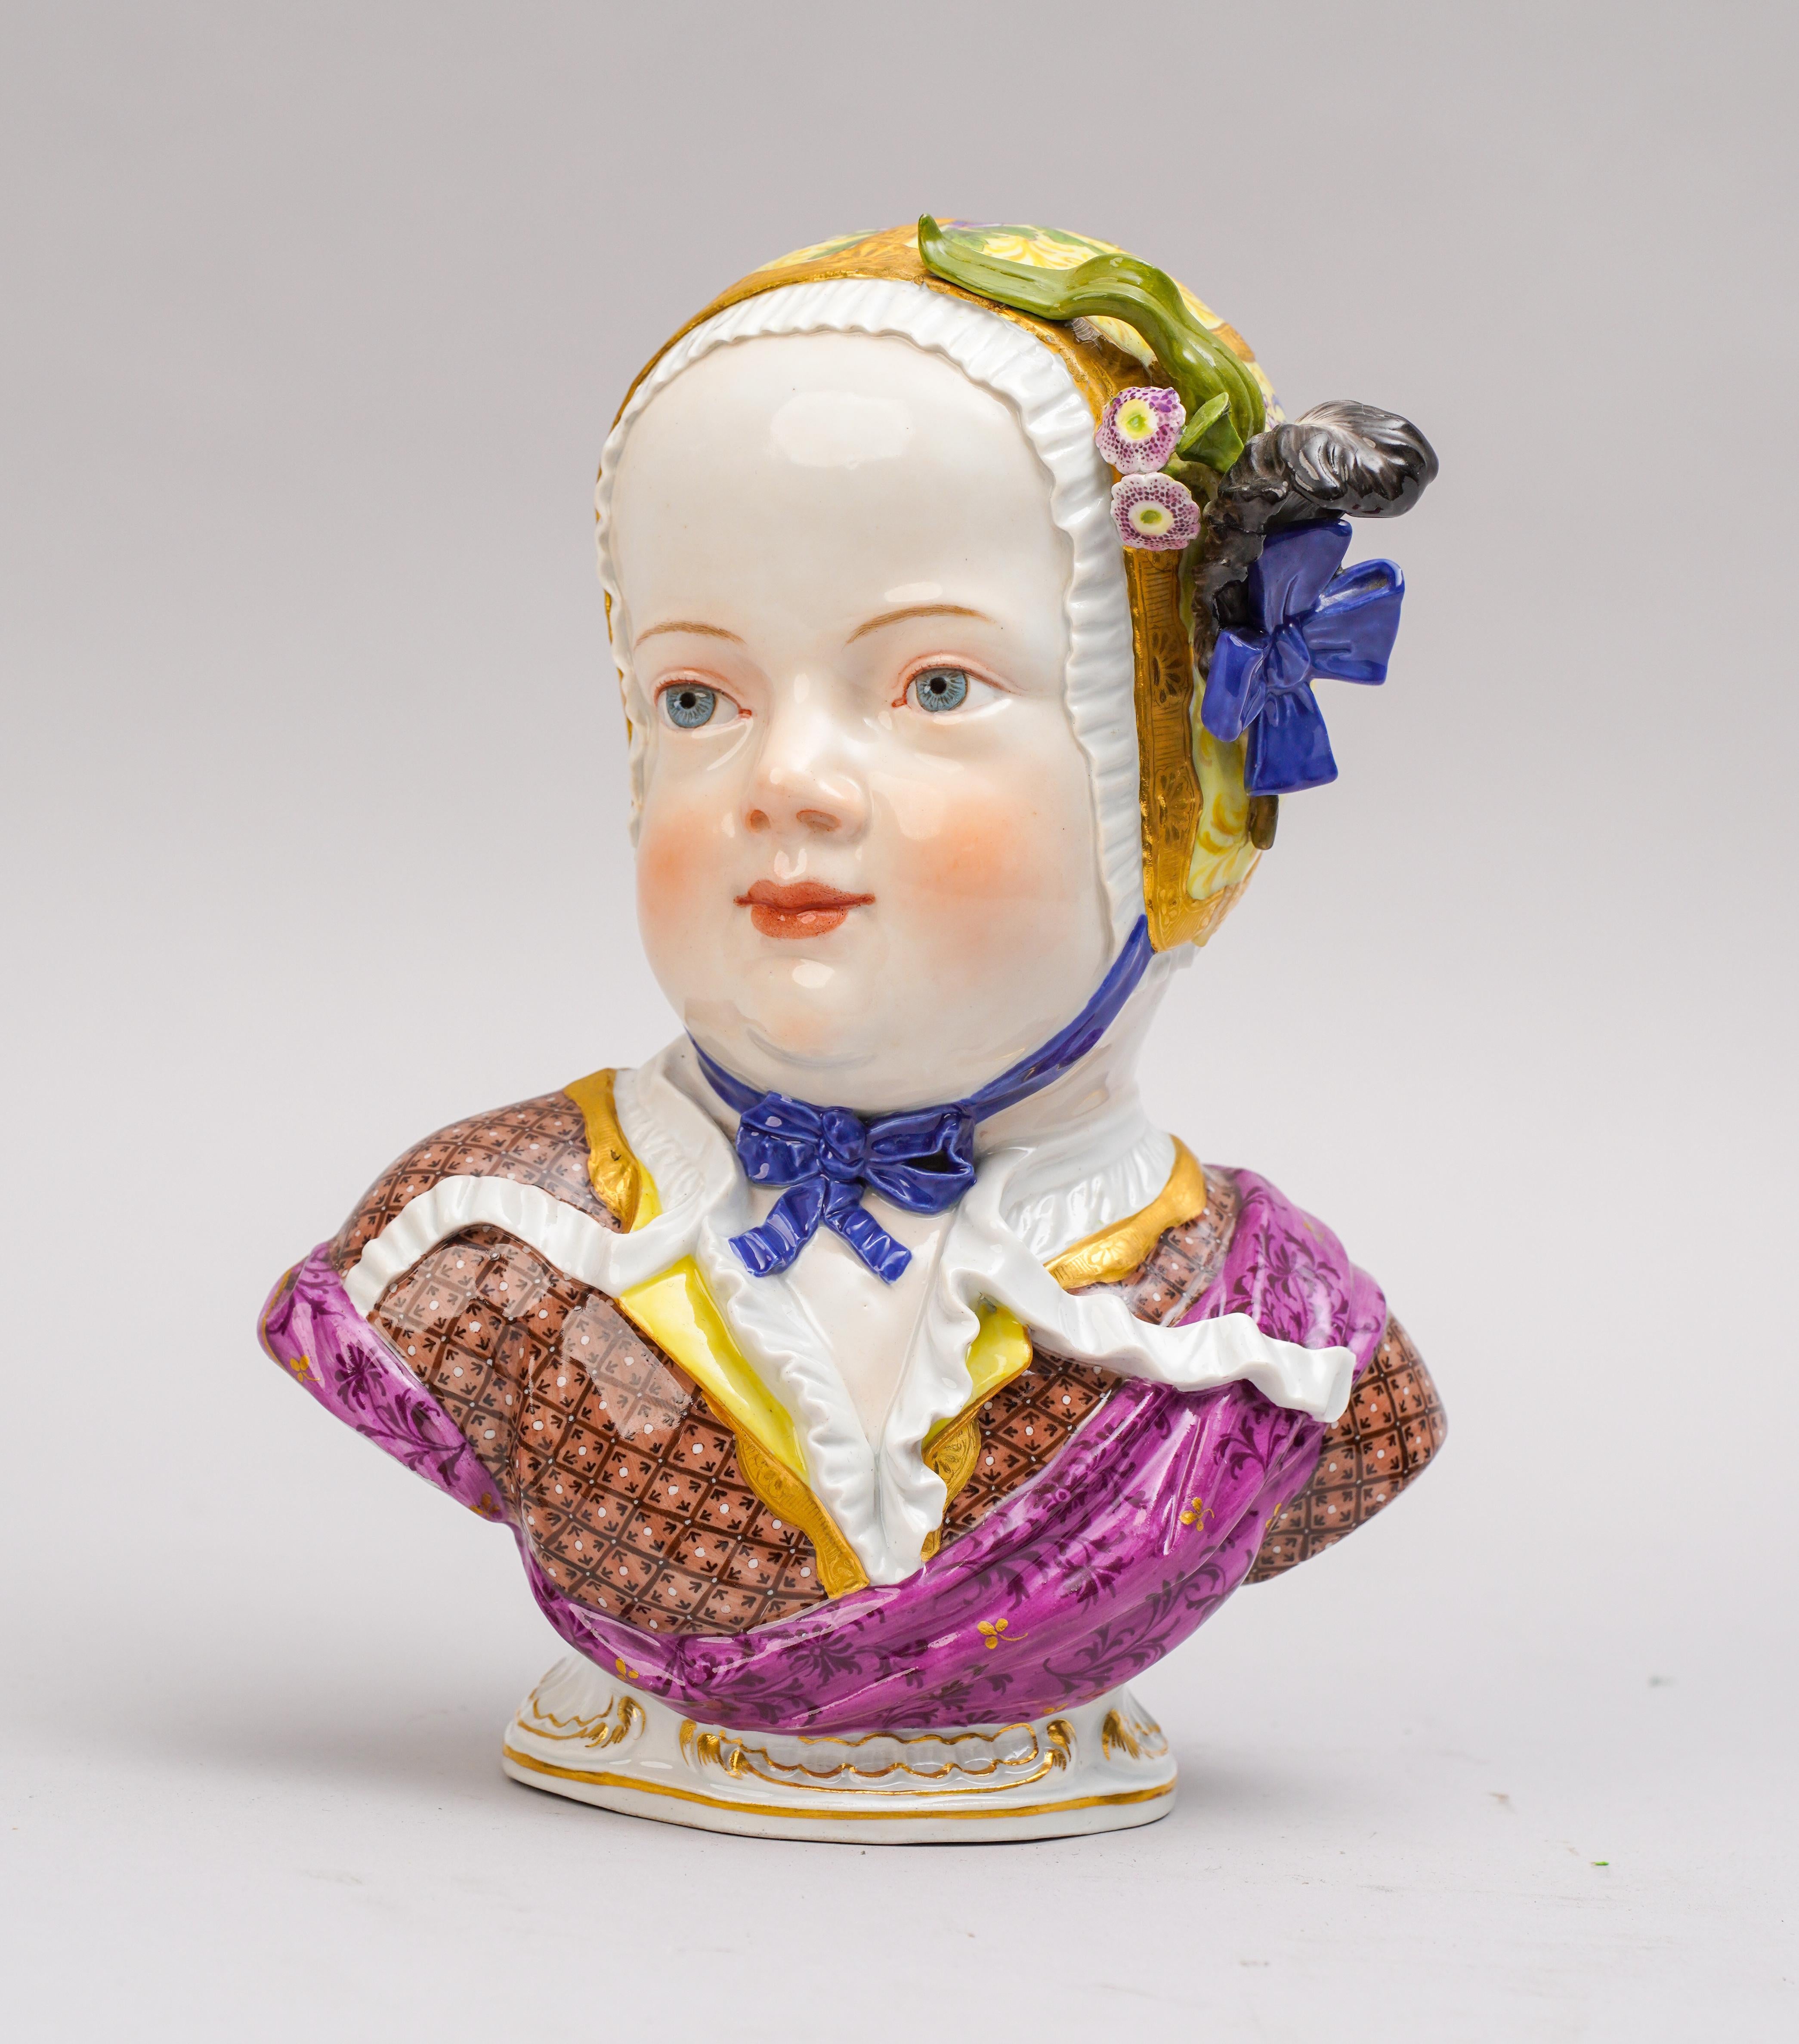 Large Meissen Porcelain modeled as a bust of a young child wearing a floral decorated cap, wearing open shirt with floral embellished sash.

Late 19th century

Crossed swords in underglaze blue.

Measures: Height: 9